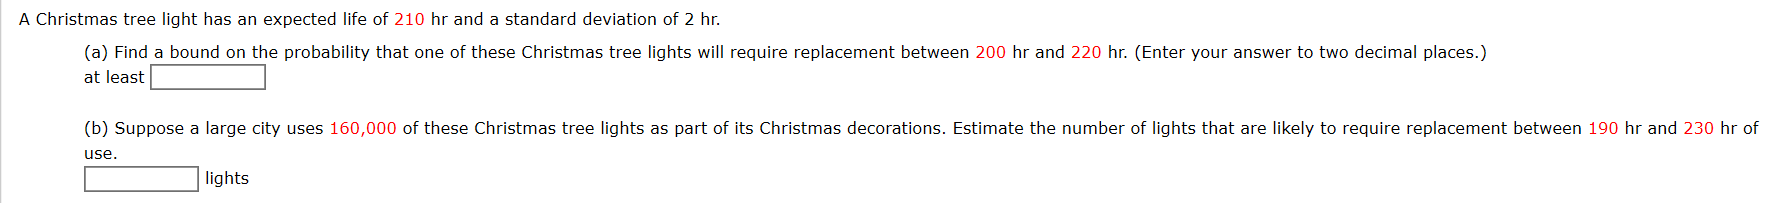 A Christmas tree light has an expected life of 210 hr and a standard deviation of 2 hr.
(a) Find a bound on the probability that one of these Christmas tree lights will require replacement between 200 hr and 220 hr. (Enter your answer to two decimal places.)
at least
(b) Suppose a large city uses 160,000 of these Christmas tree lights as part of its Christmas decorations. Estimate the number of lights that are likely to require replacement between 190 hr and 230 hr of
use.
lights
